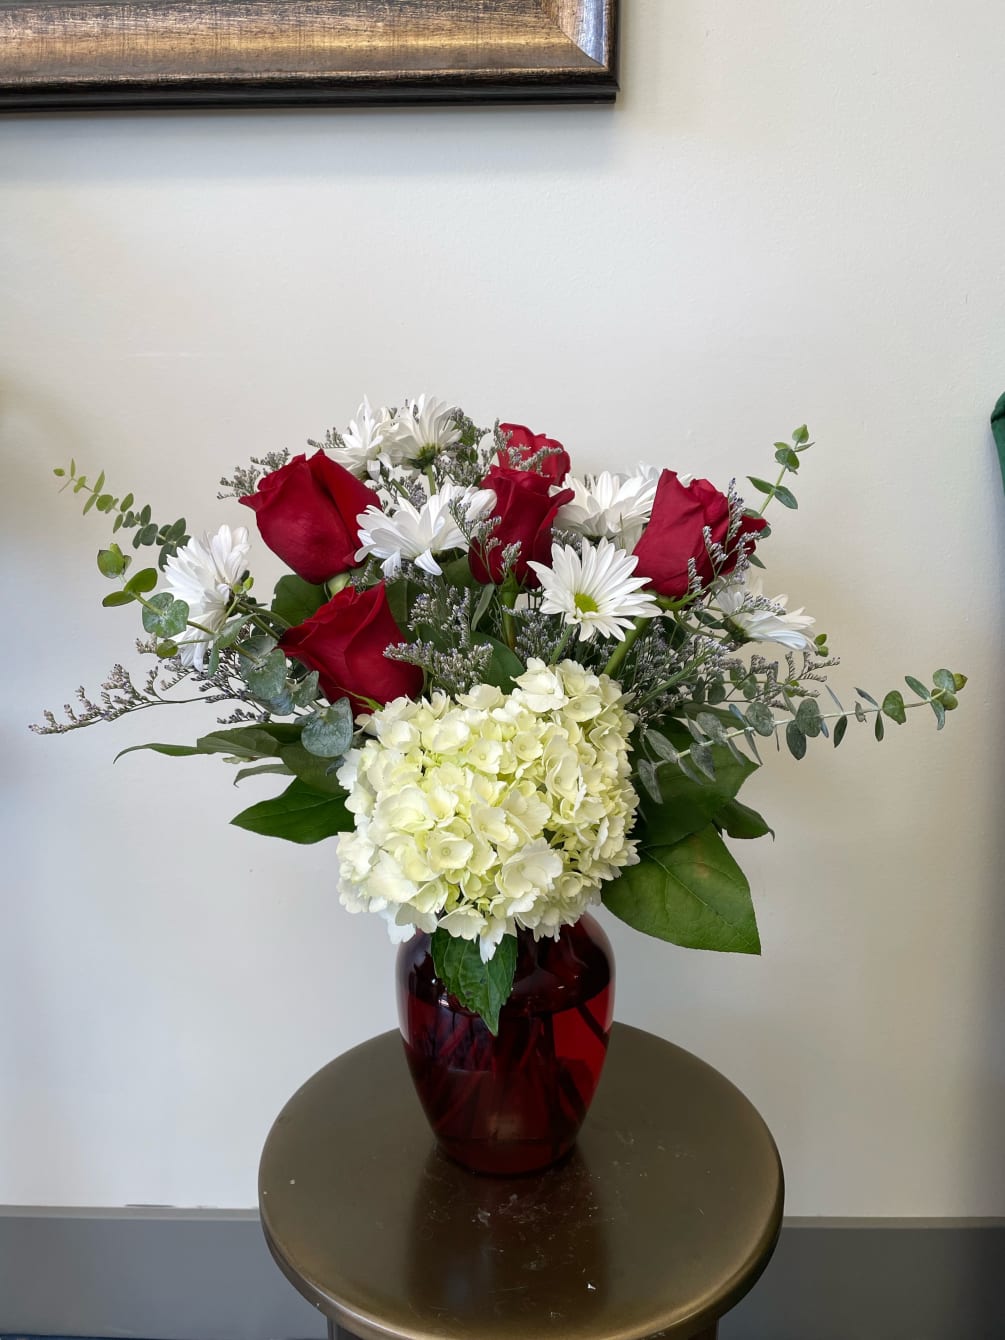 This romantic one-sided arrangement comes in a red glass vase and features